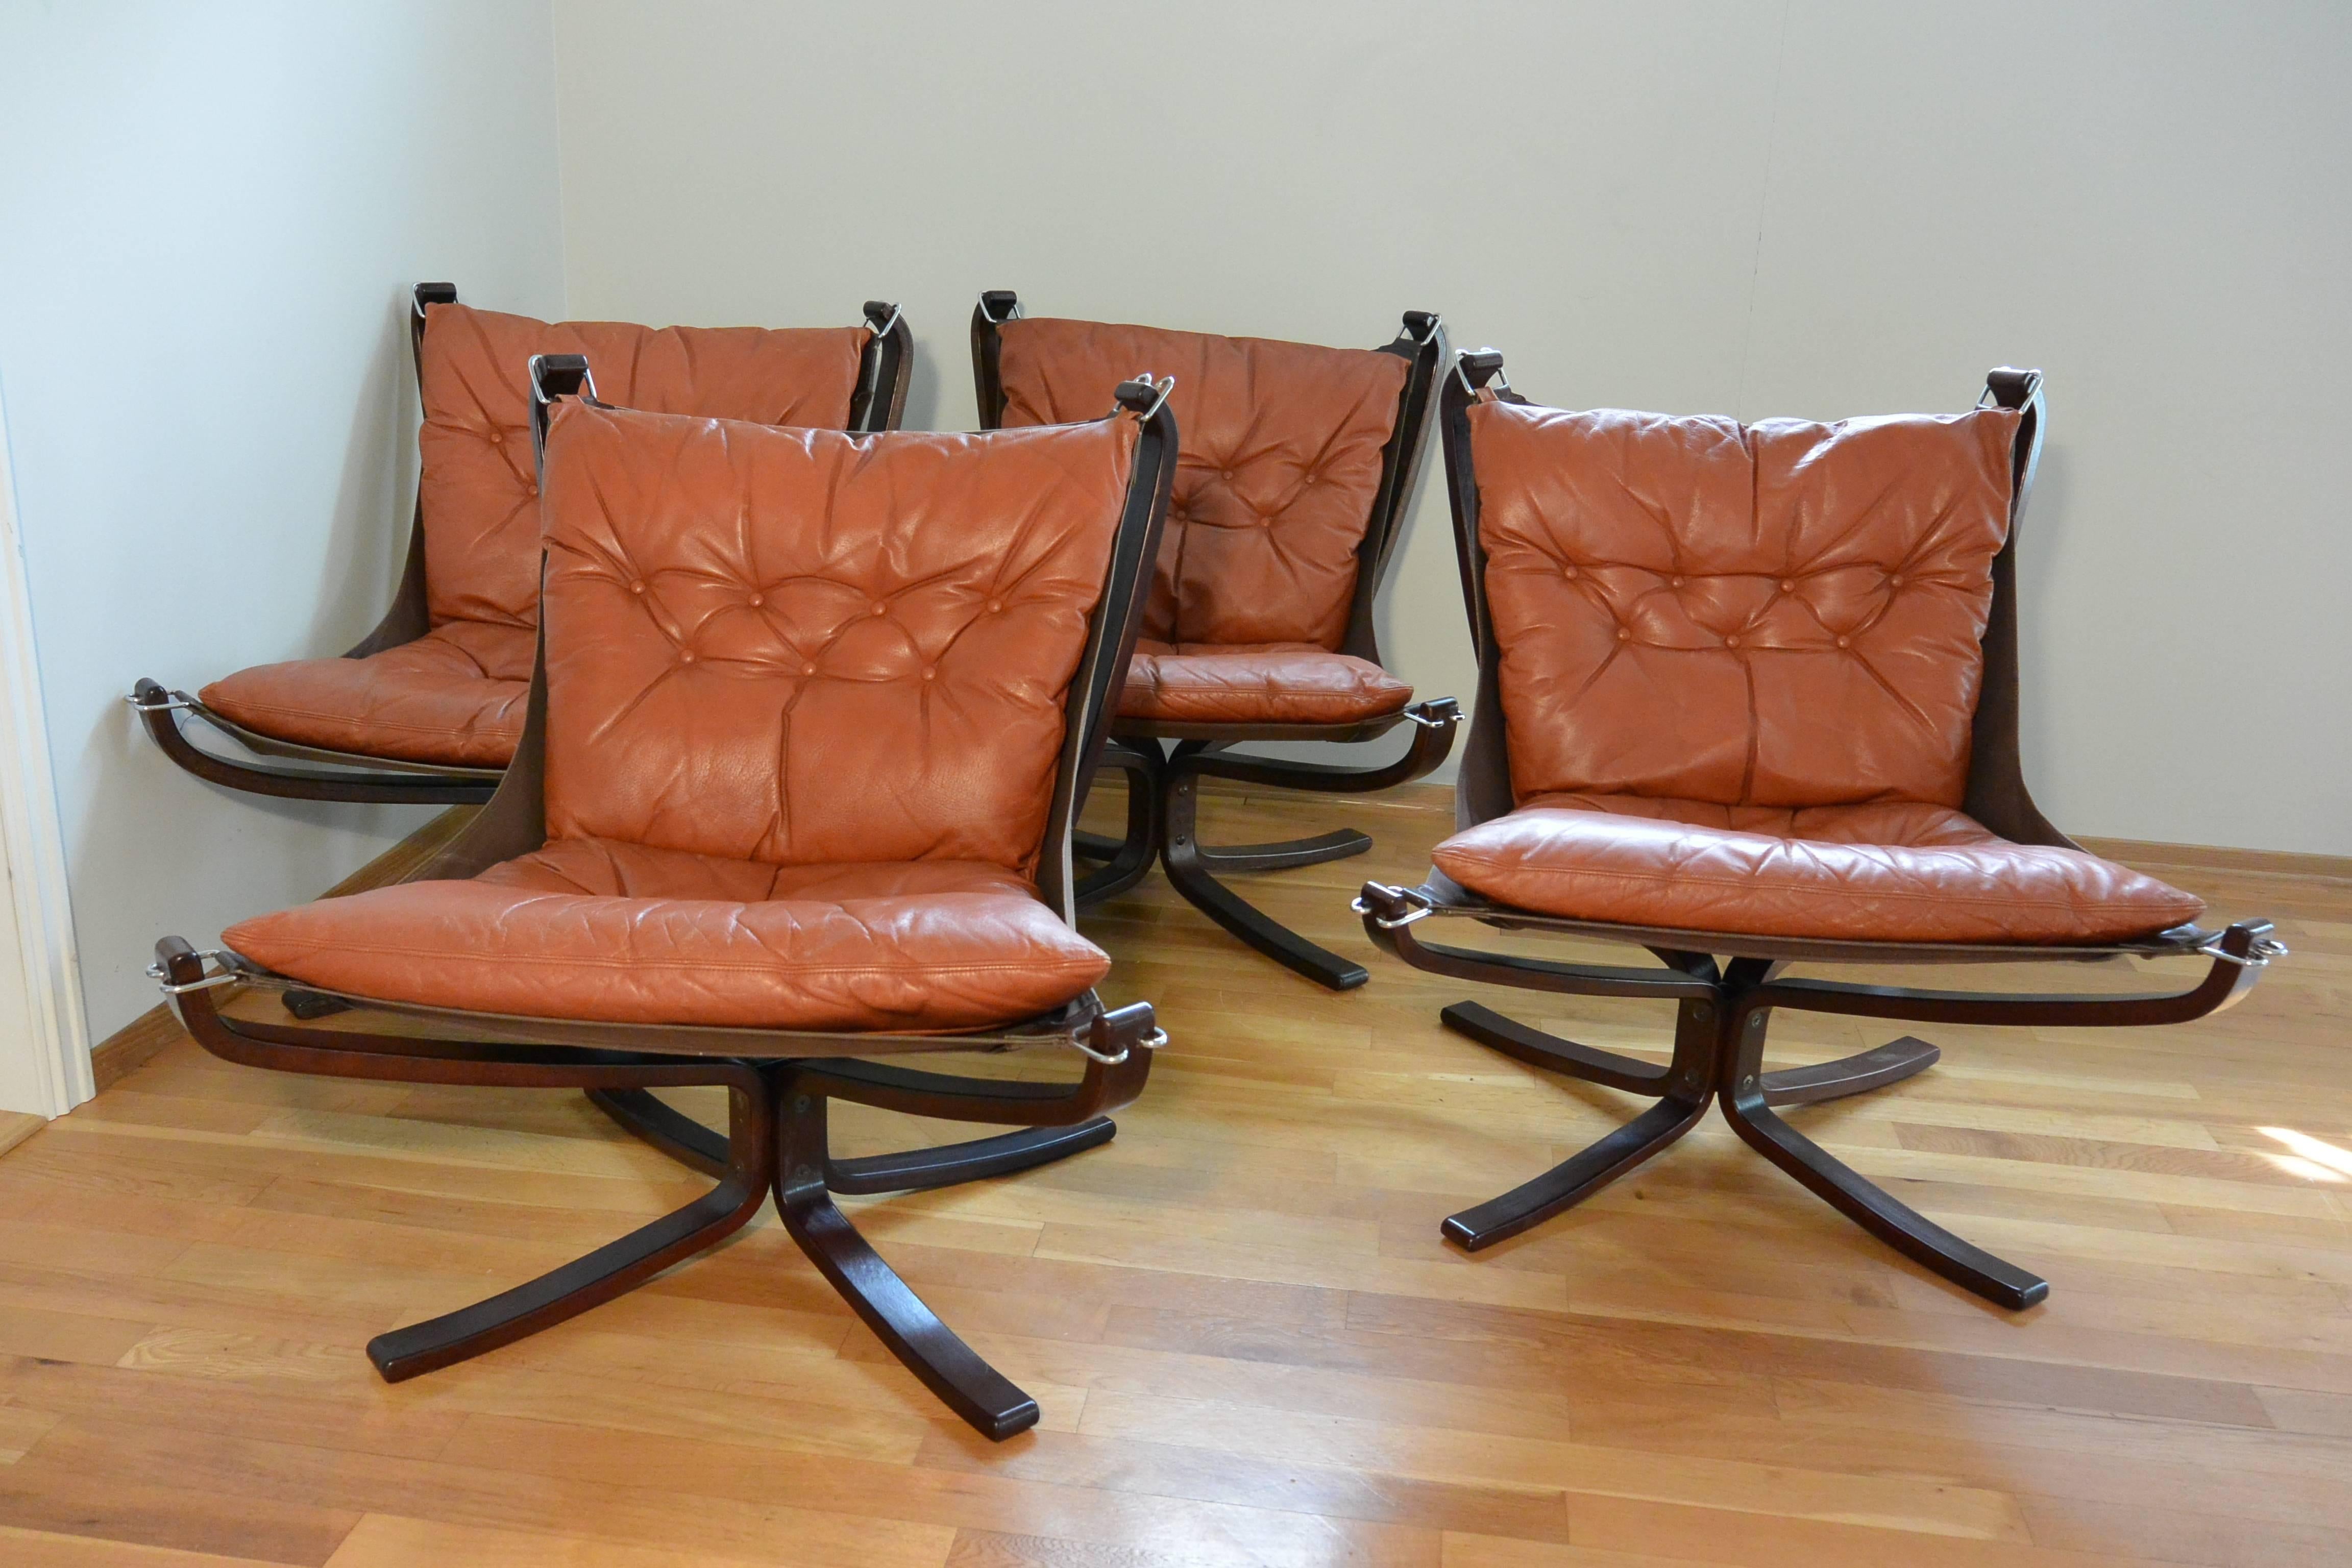 Falcon chair set of four in cognac leather and laminated rosewood frame. Designed by Sigurd Ressell fro Vatne Mobler, Norway.

The laminated rosewood frame legs are bolted at the base to a metal rectangular tube. The canvas attaches to the frame